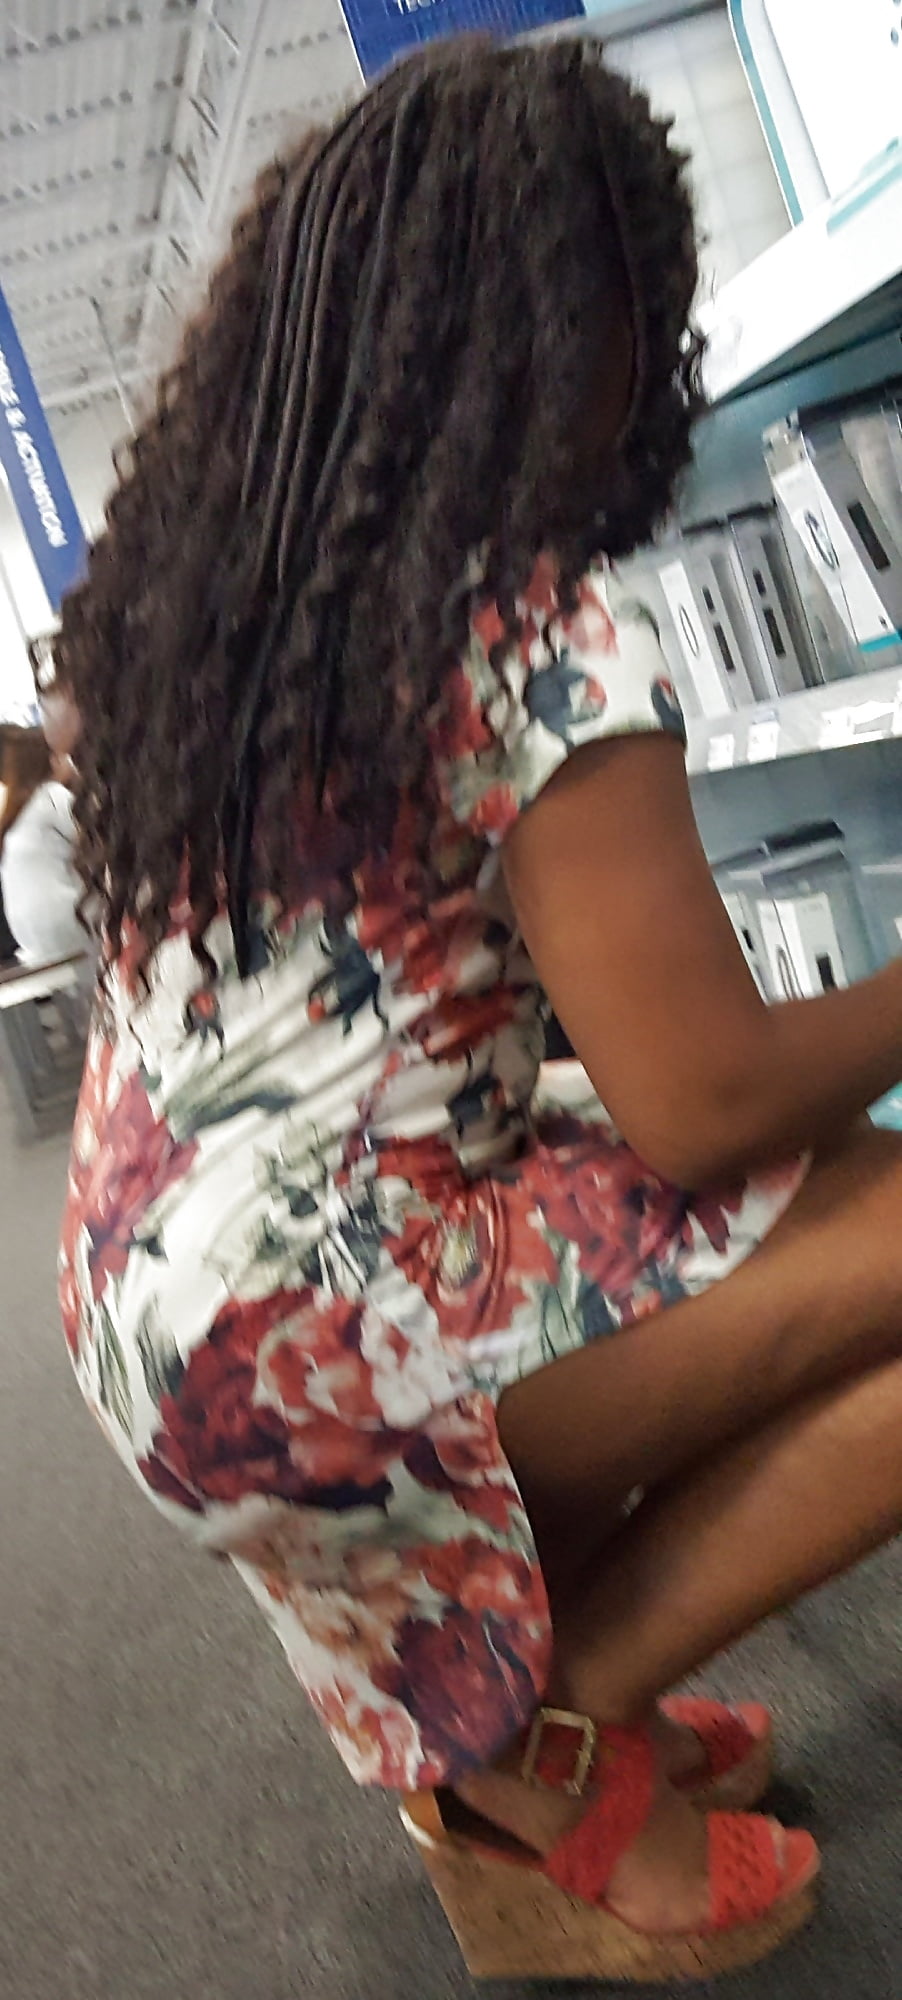 Ebony wife shopping for hubby in thot dress Creep Shots (9/18)